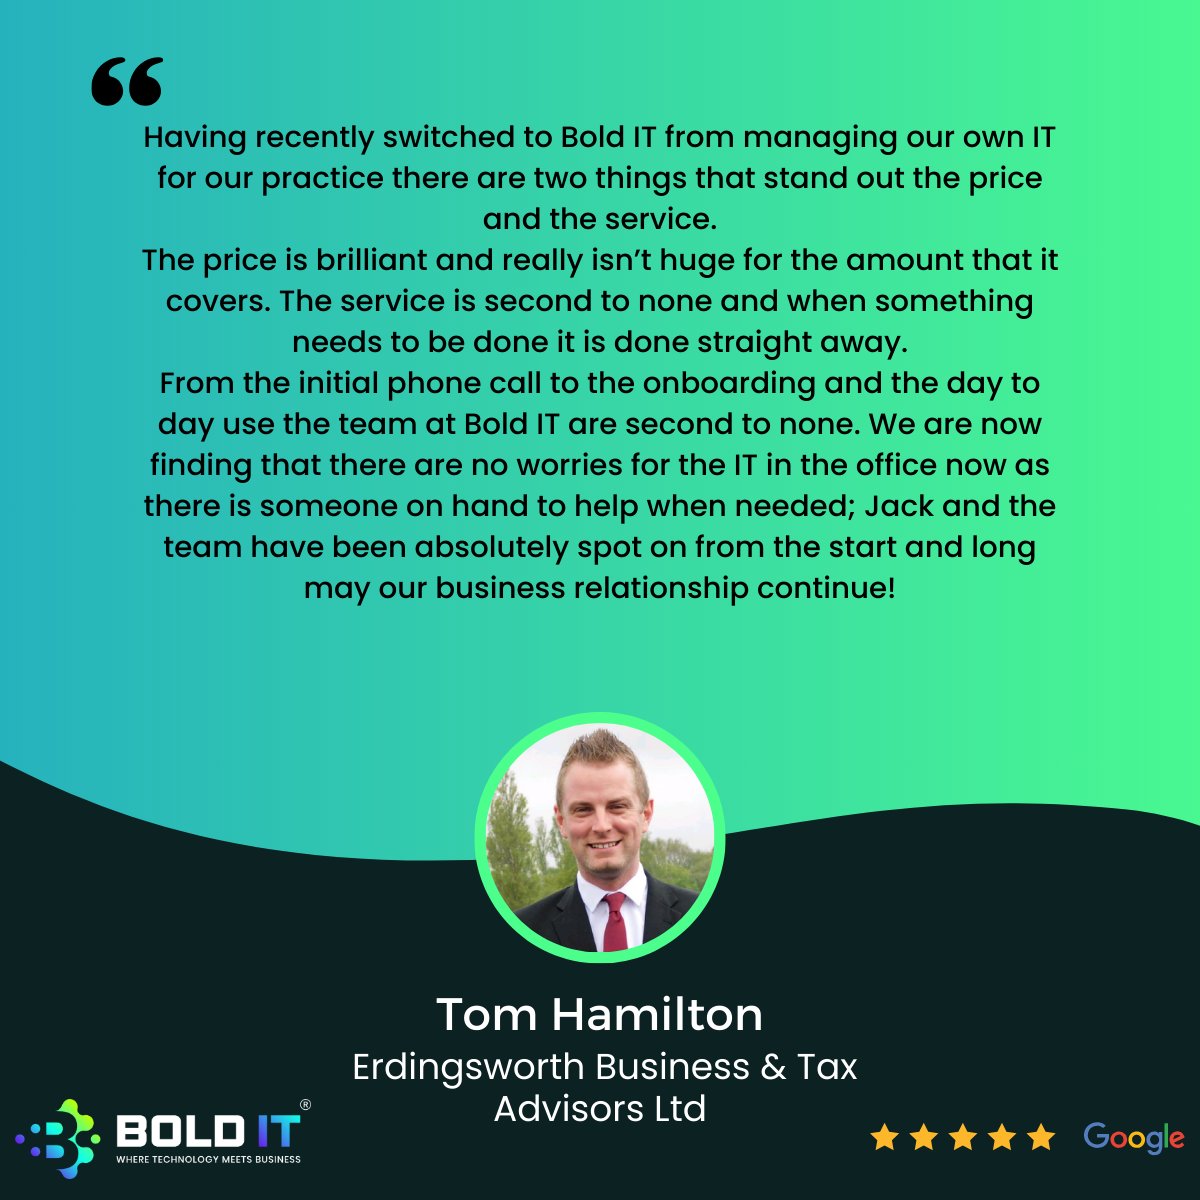 We're excited to share this fantastic feedback from Tom Hamilton, Director at Erdingsworth Business & Tax Advisors Ltd, one of our valued clients.

Thank you for trusting us and sharing your positive experience. Your feedback fuels our drive for excellence.🌟

#ManagedITServices